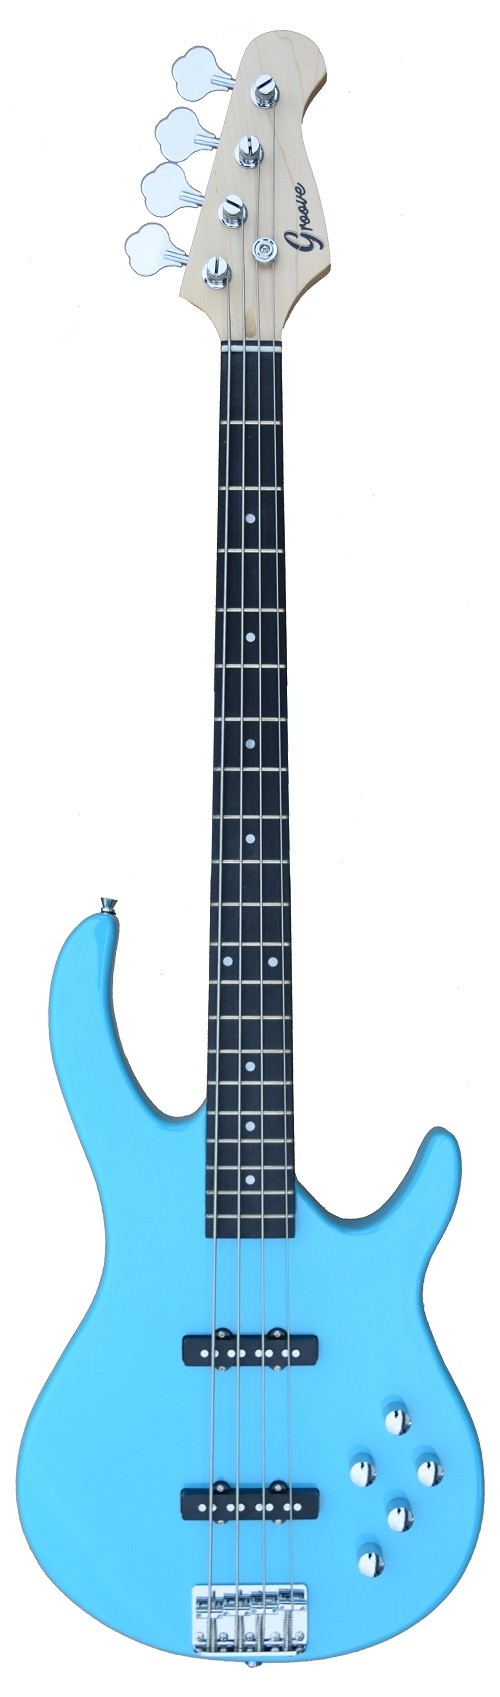 Bass Guitar 4 Strings with Jazz Pickups into Daphne Blue Color